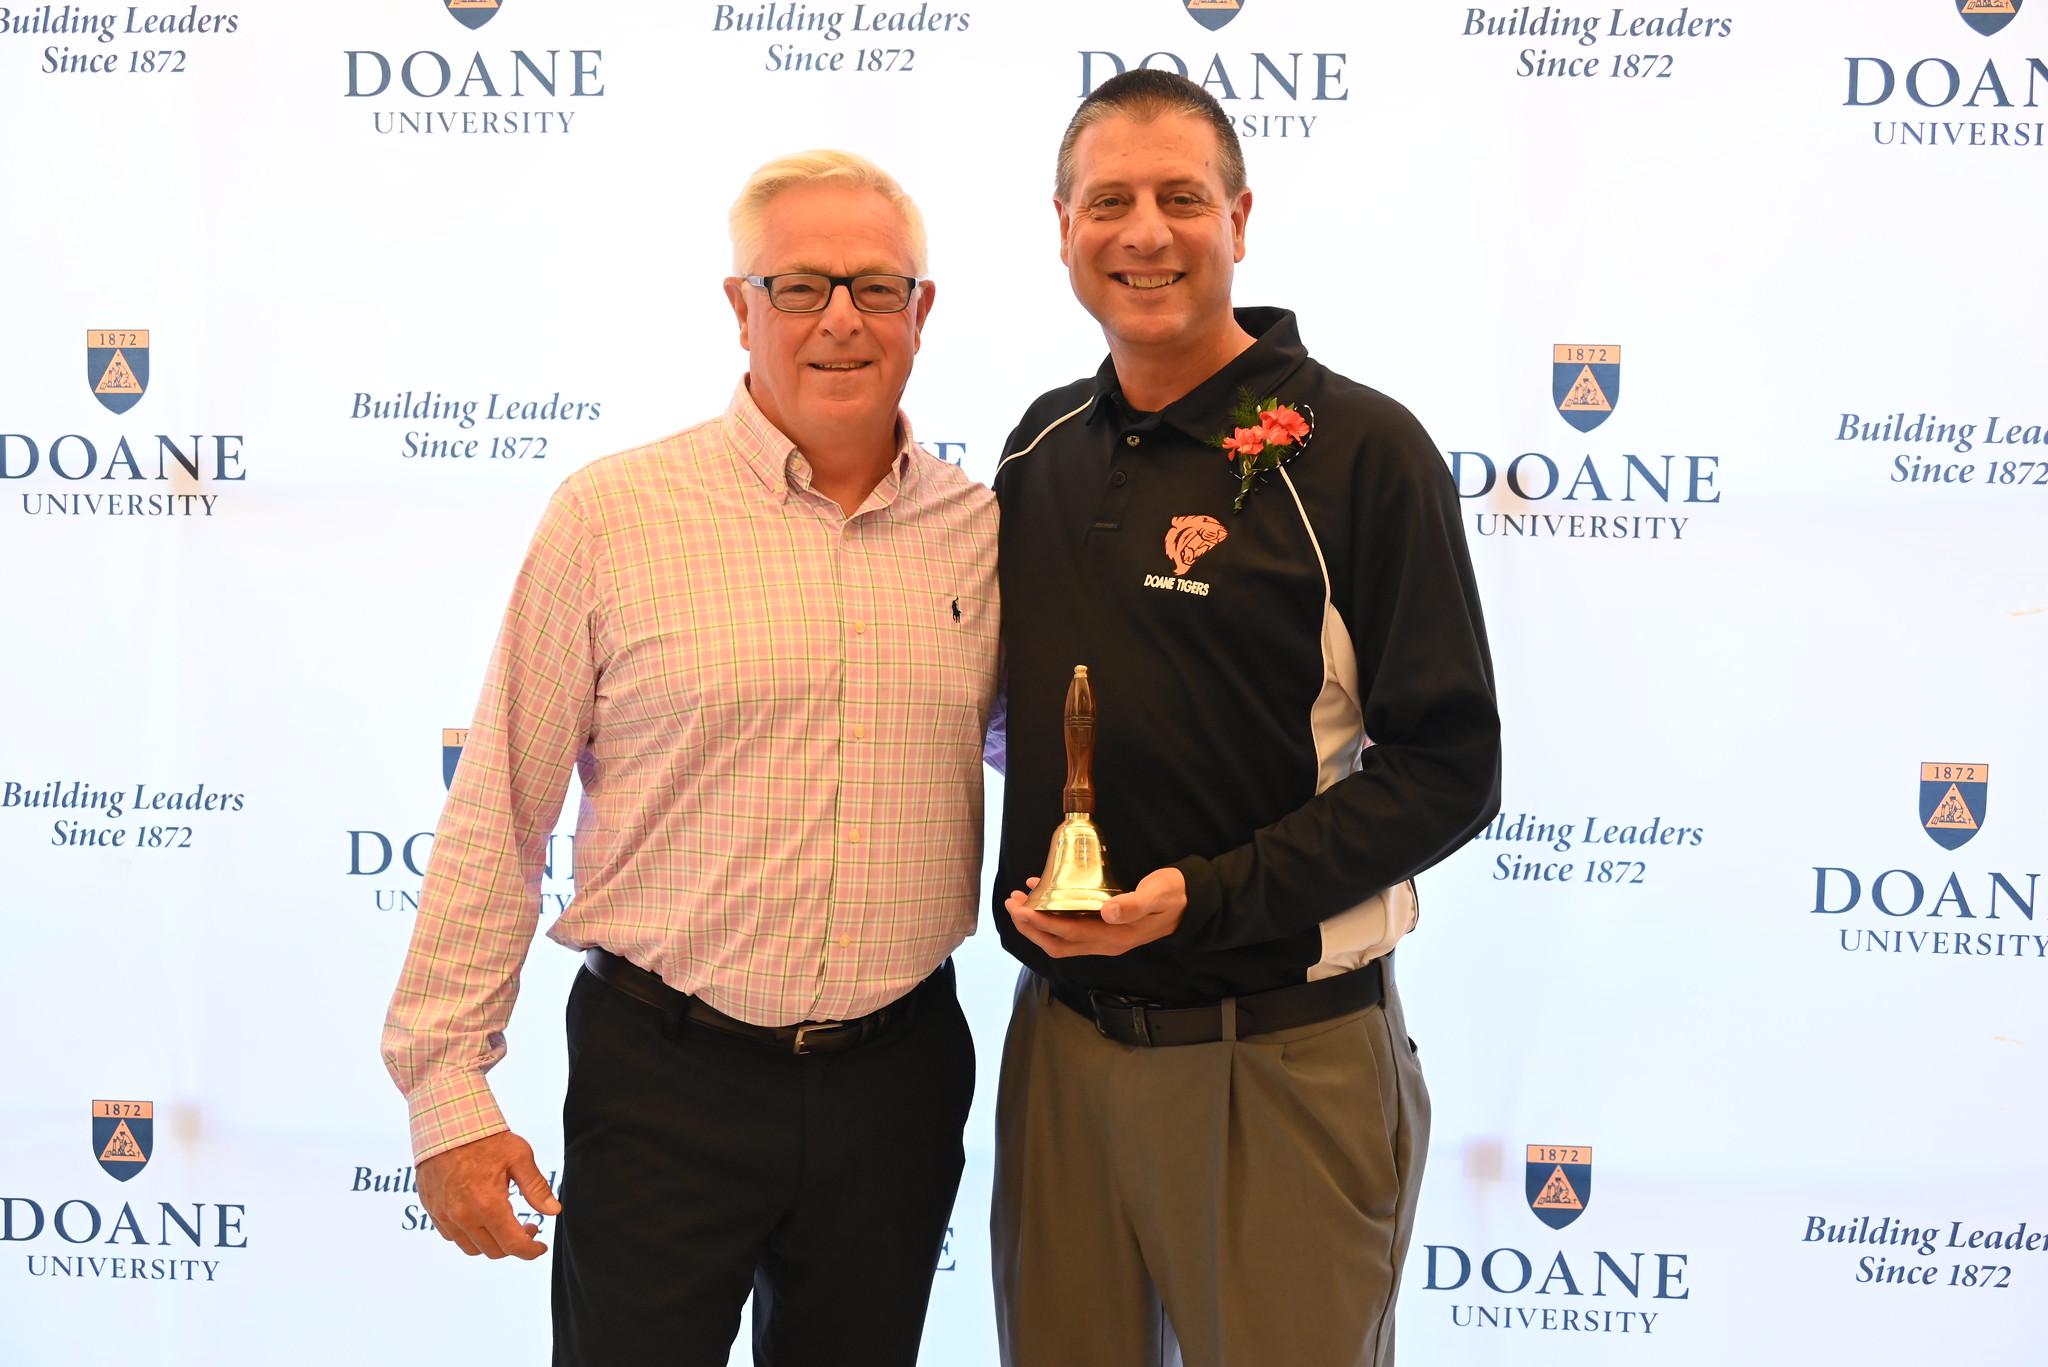 Dr. Chad Denker poses next to Ed Fye, head track and field coach at Doane University. Denker holds an old-fashioned brass bell, the award for Doane's Educator of the Year.